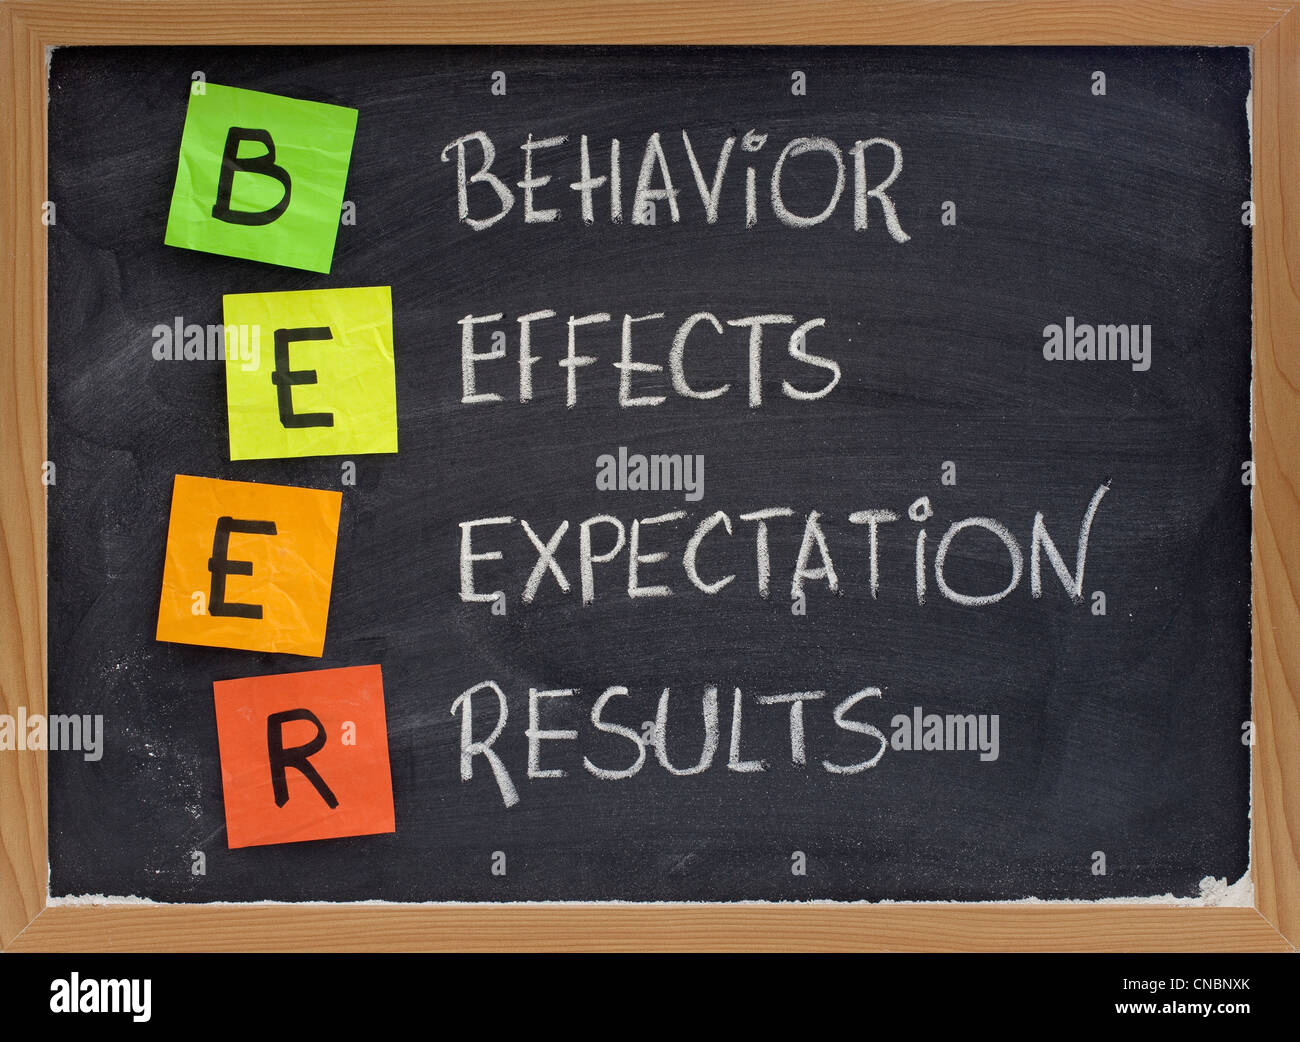 BEER (behavior, effects, expectation, results) acronym - assessing performance of project or new initiative Stock Photo